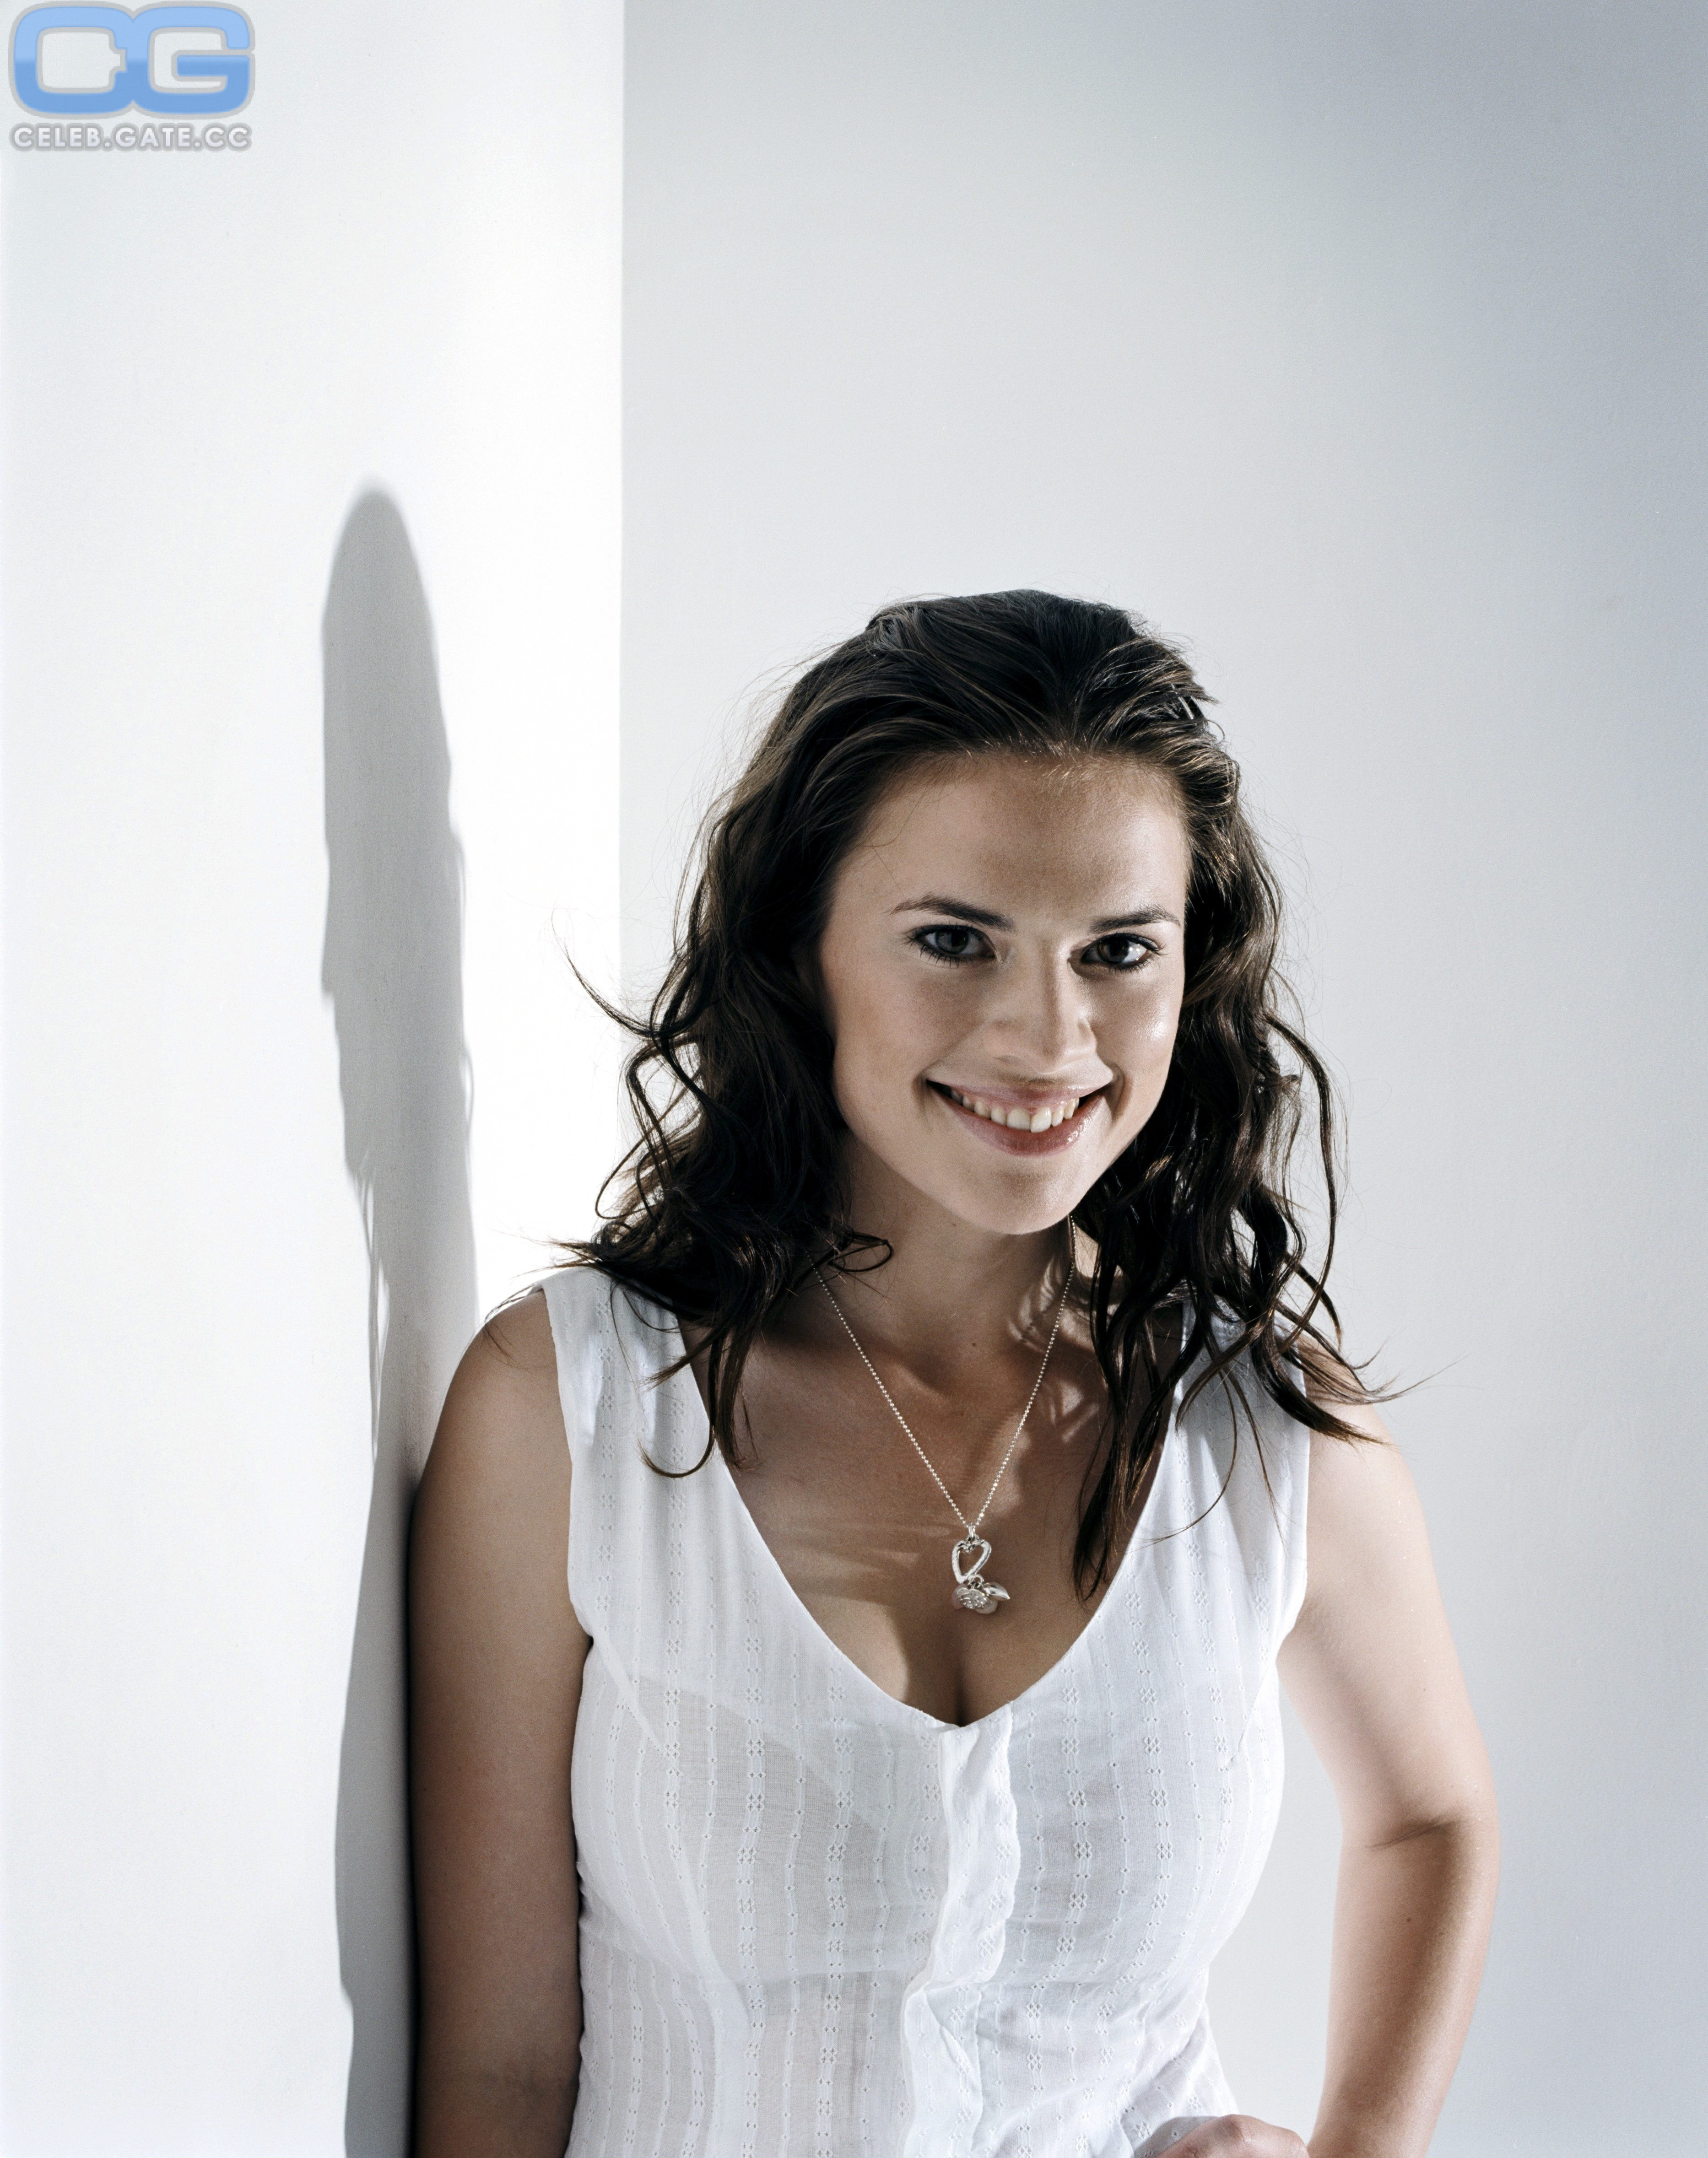 Hayley Atwell 